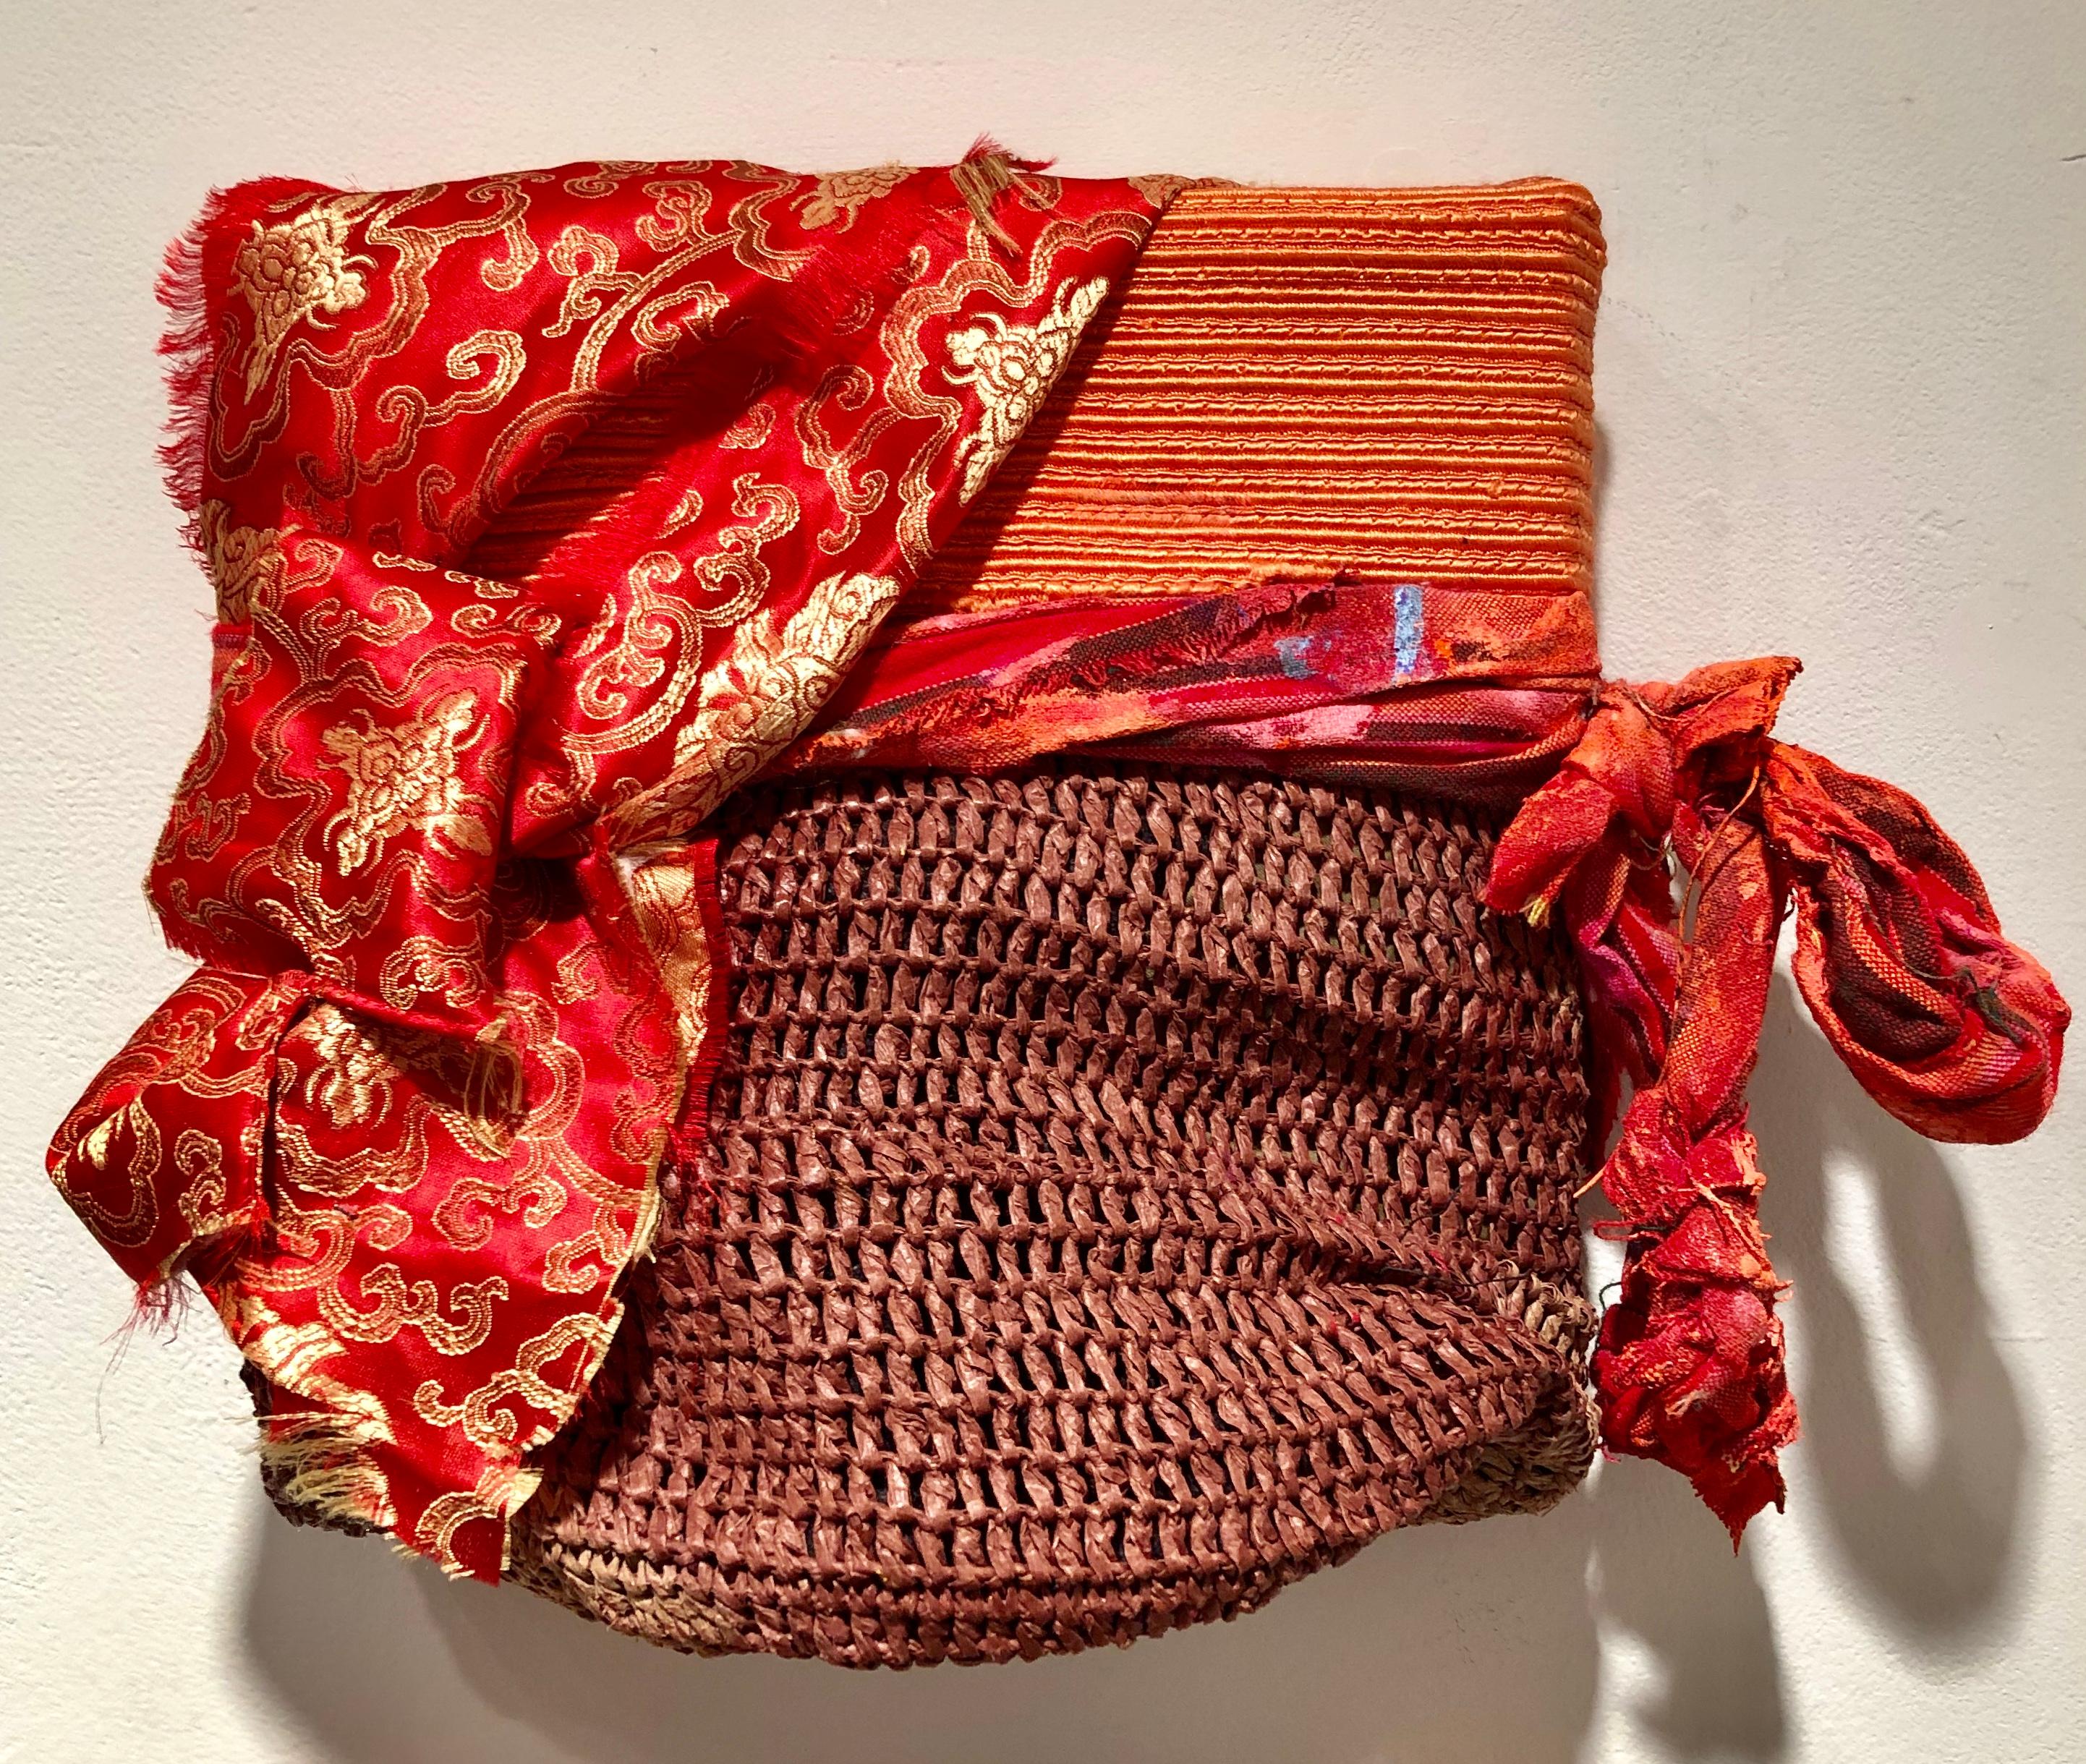 Genten/Color - Fabric and mixed media sculpture, red and brown, varying textures - Mixed Media Art by Diane Cooper